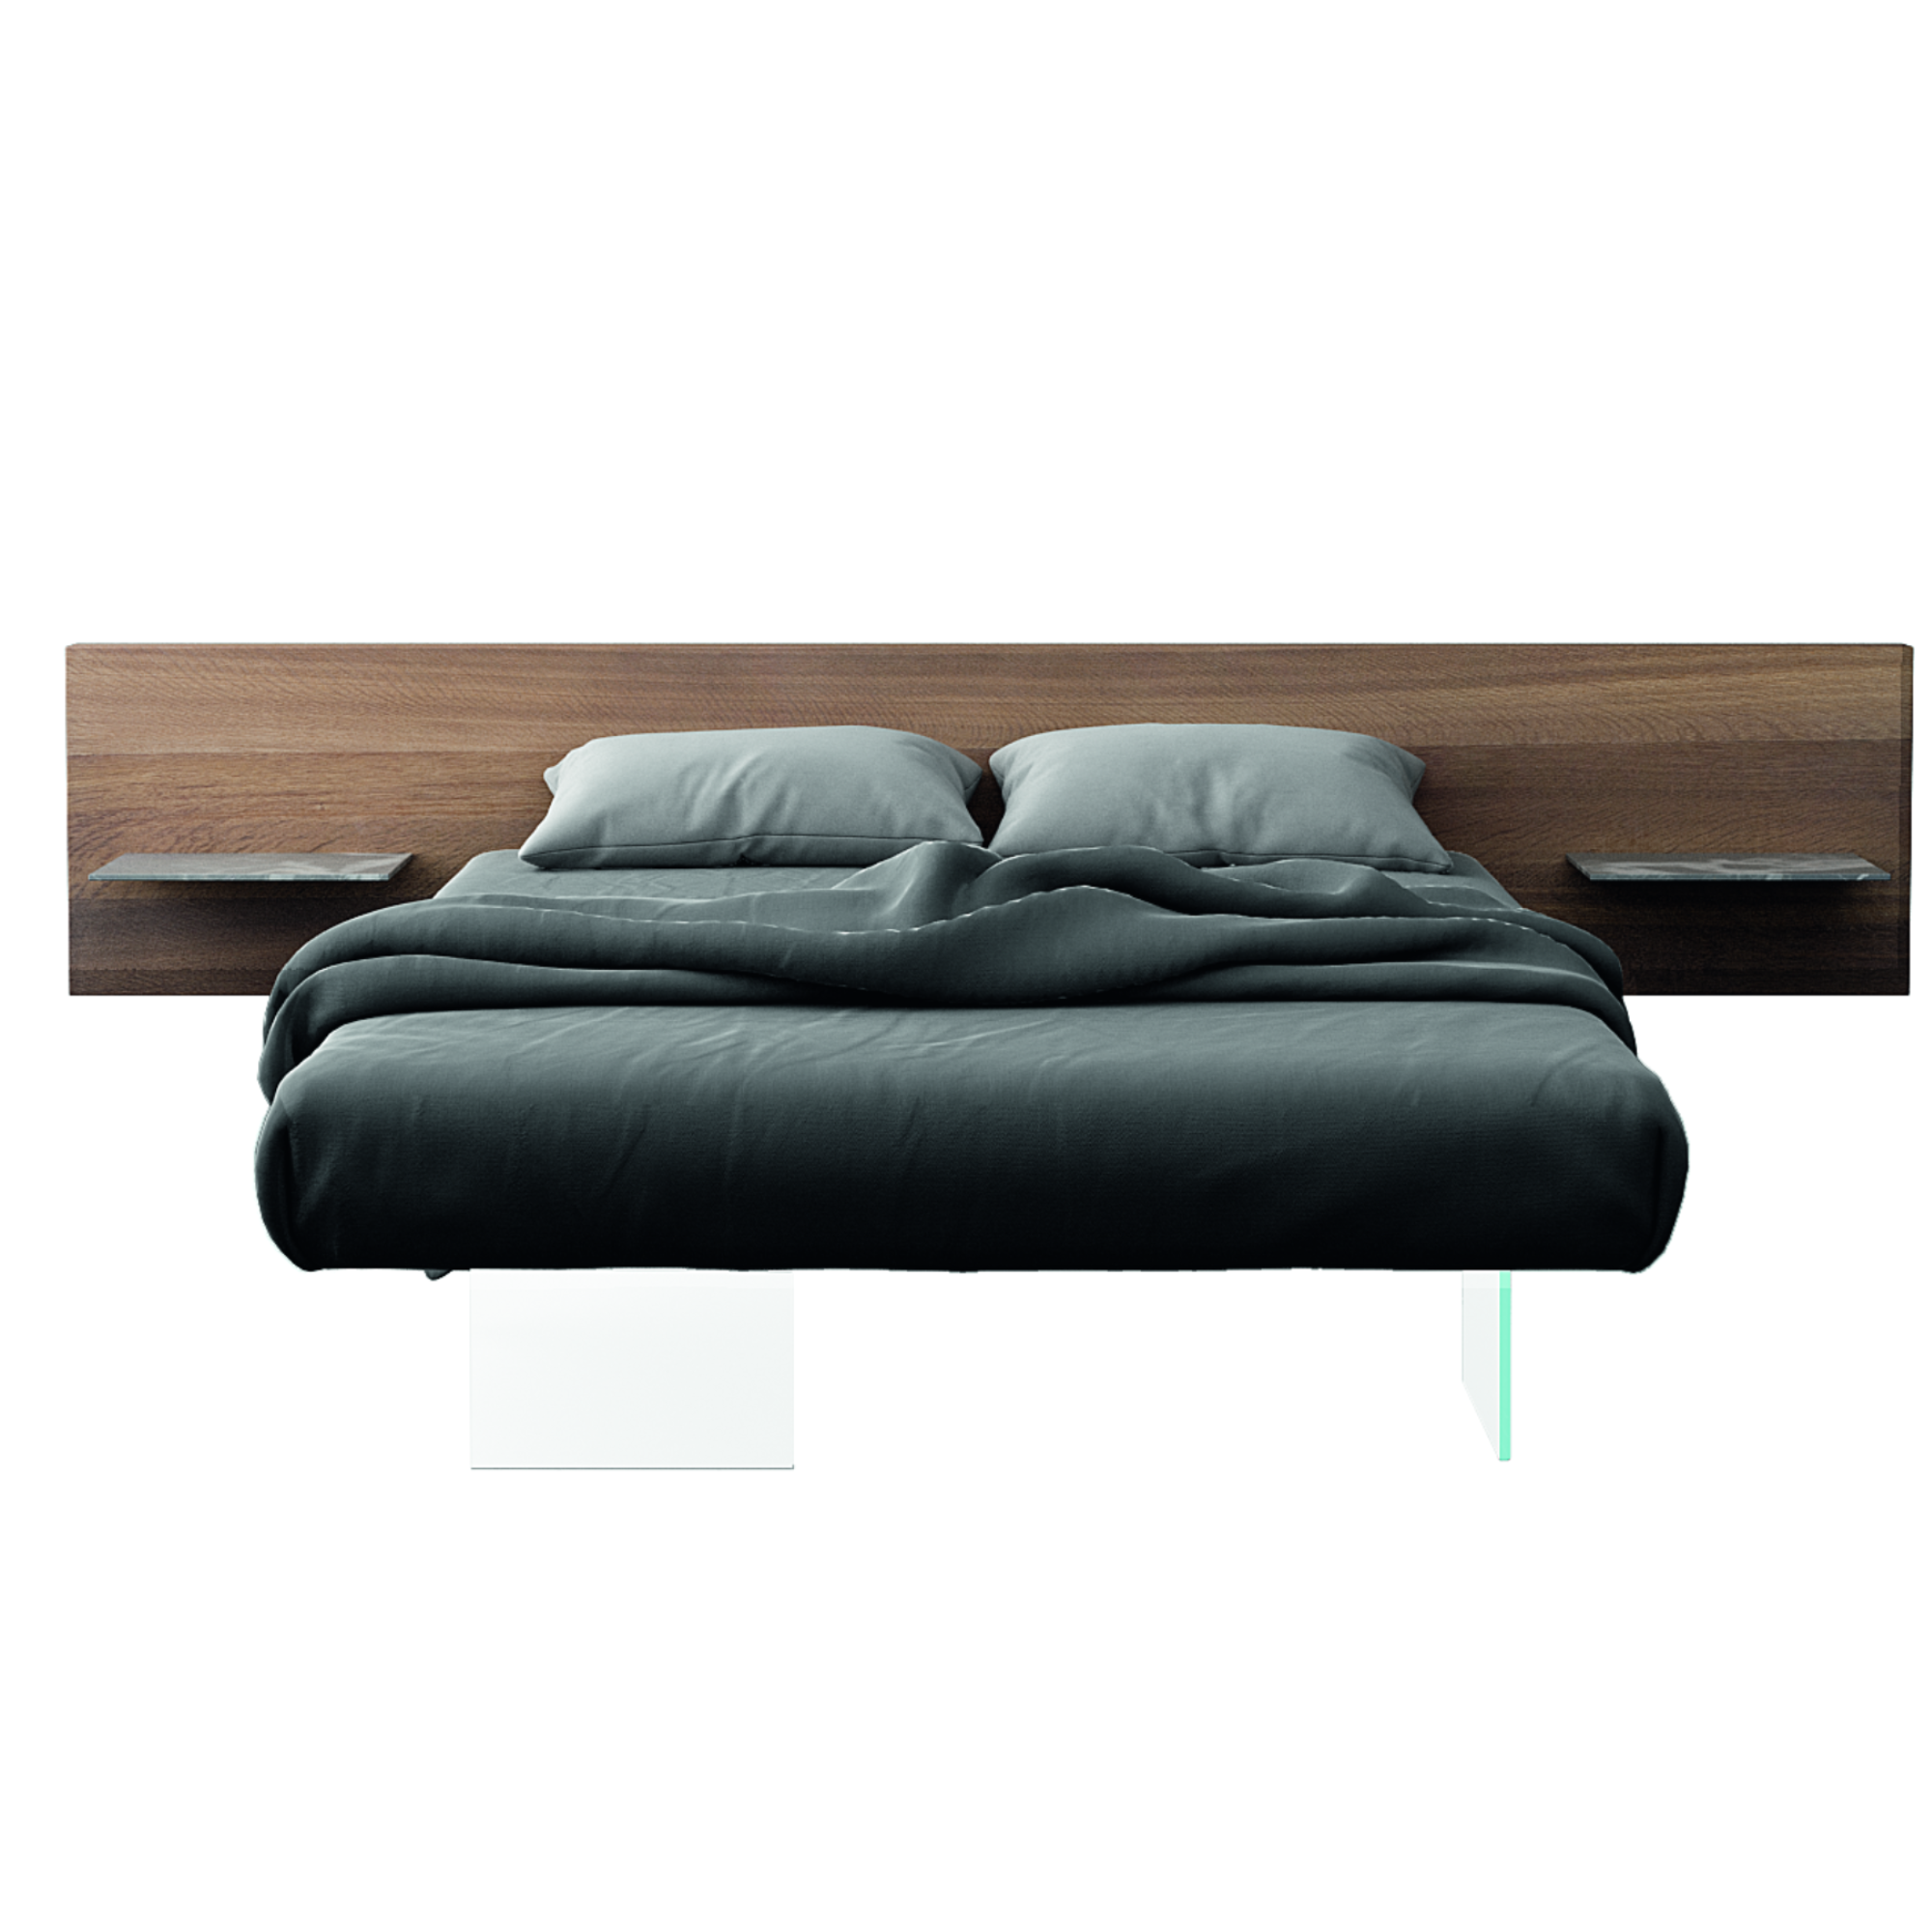 AIR WILDWOOD WALL-MOUNTED BED , by LAGO